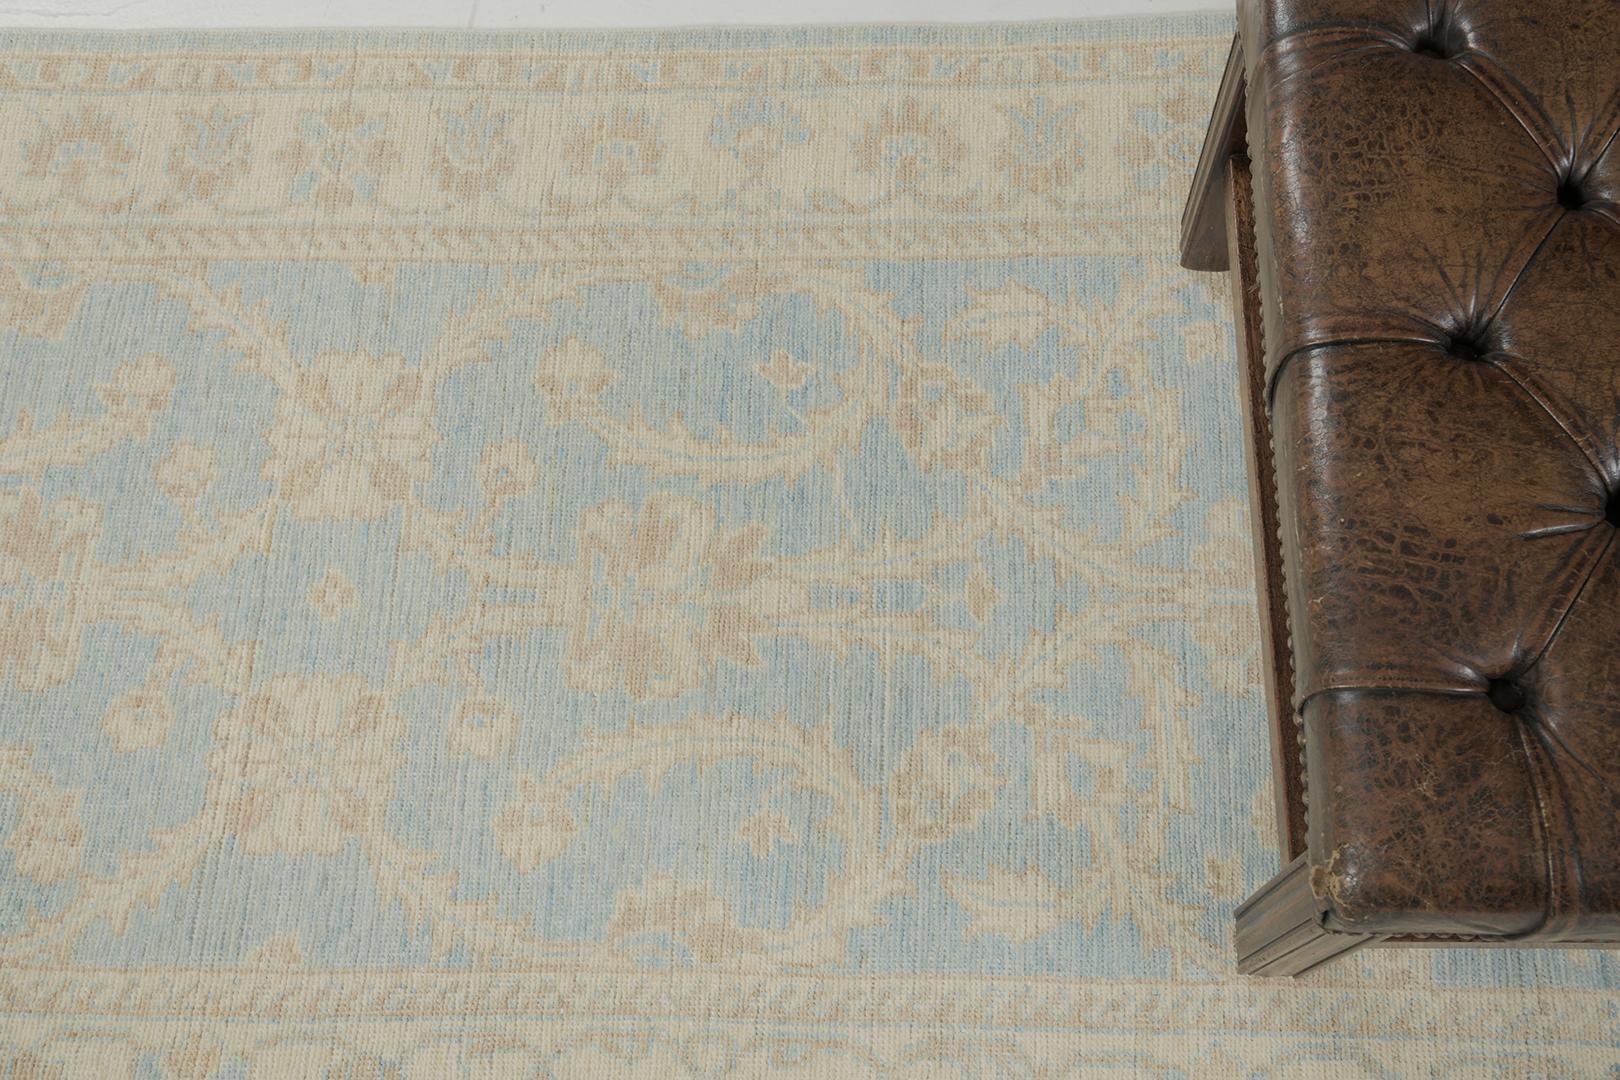 This will be an excellent choice to style your home with our Sultanabad Rug revival from our Rapture Collection. Perfect anywhere and in any style you want. Remarkable vines are engaged with various embellishments and symbolic elements in oatmeal,